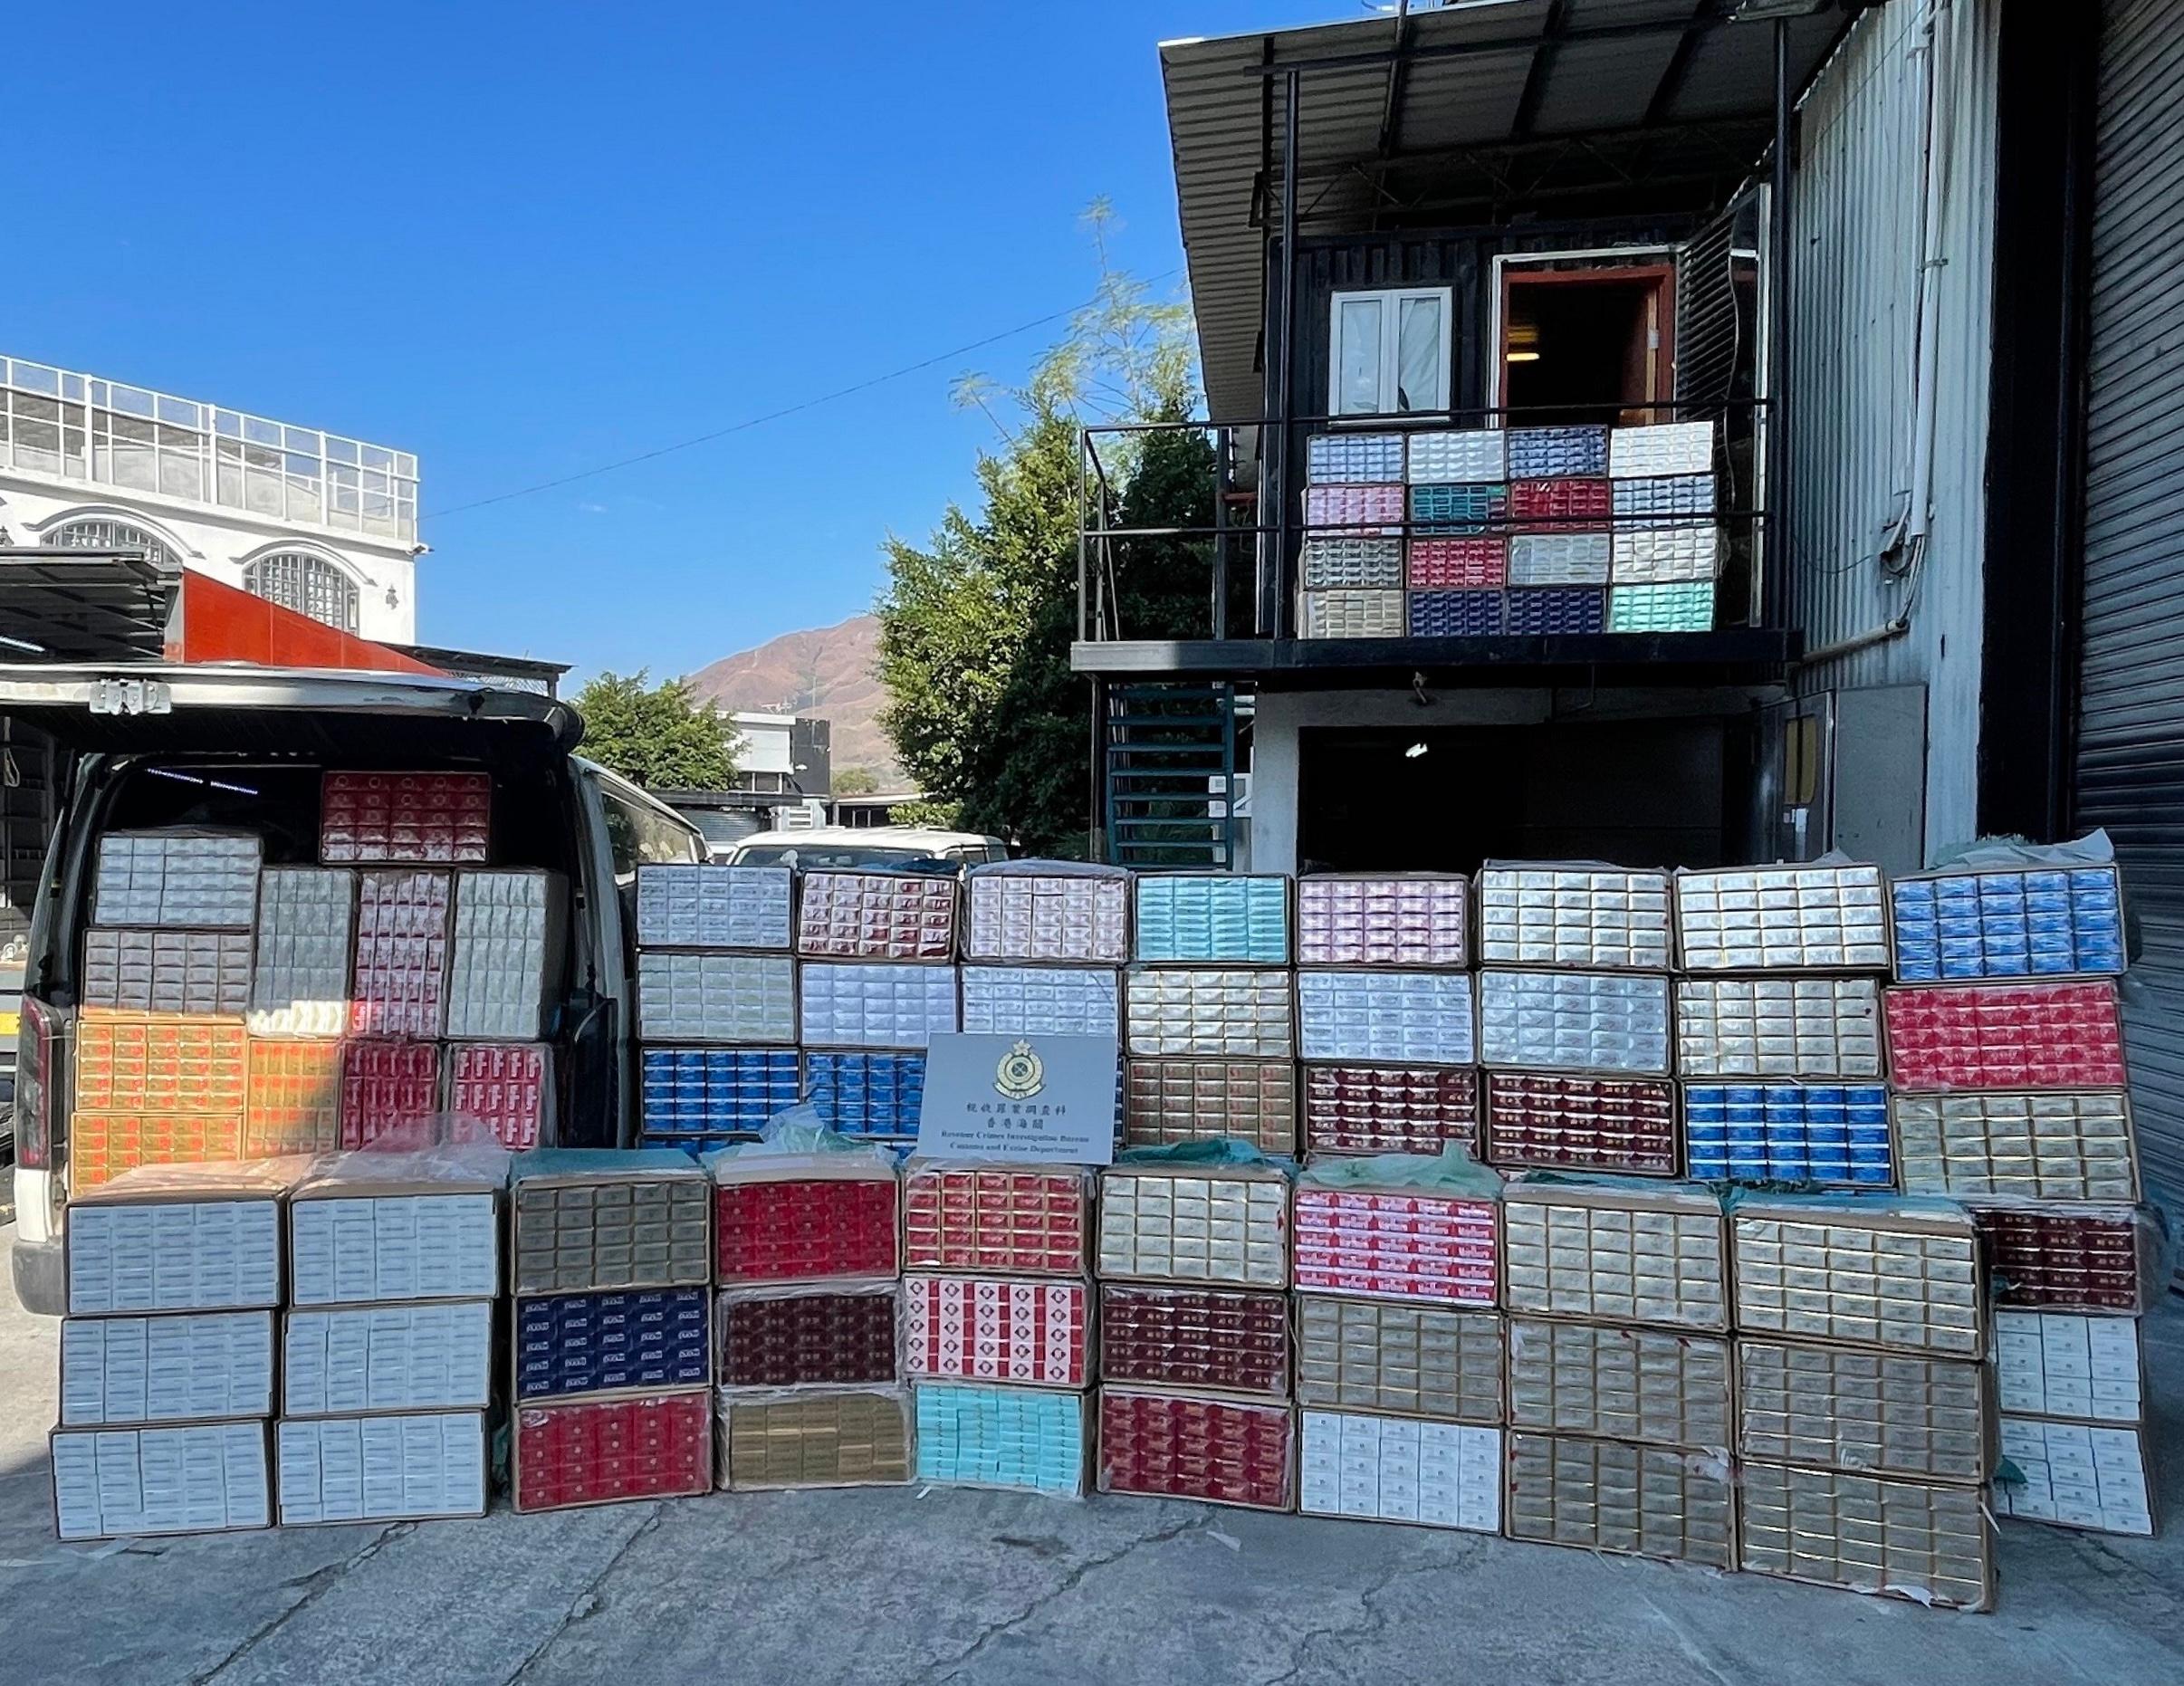 Hong Kong Customs today (January 4) raided a suspected illicit cigarette storage in Yuen Long and seized about 1.75 million suspected illicit cigarettes with an estimated market value of about $4.8 million and a duty potential of about $3.3 million. Photo shows the suspected illicit cigarettes seized.